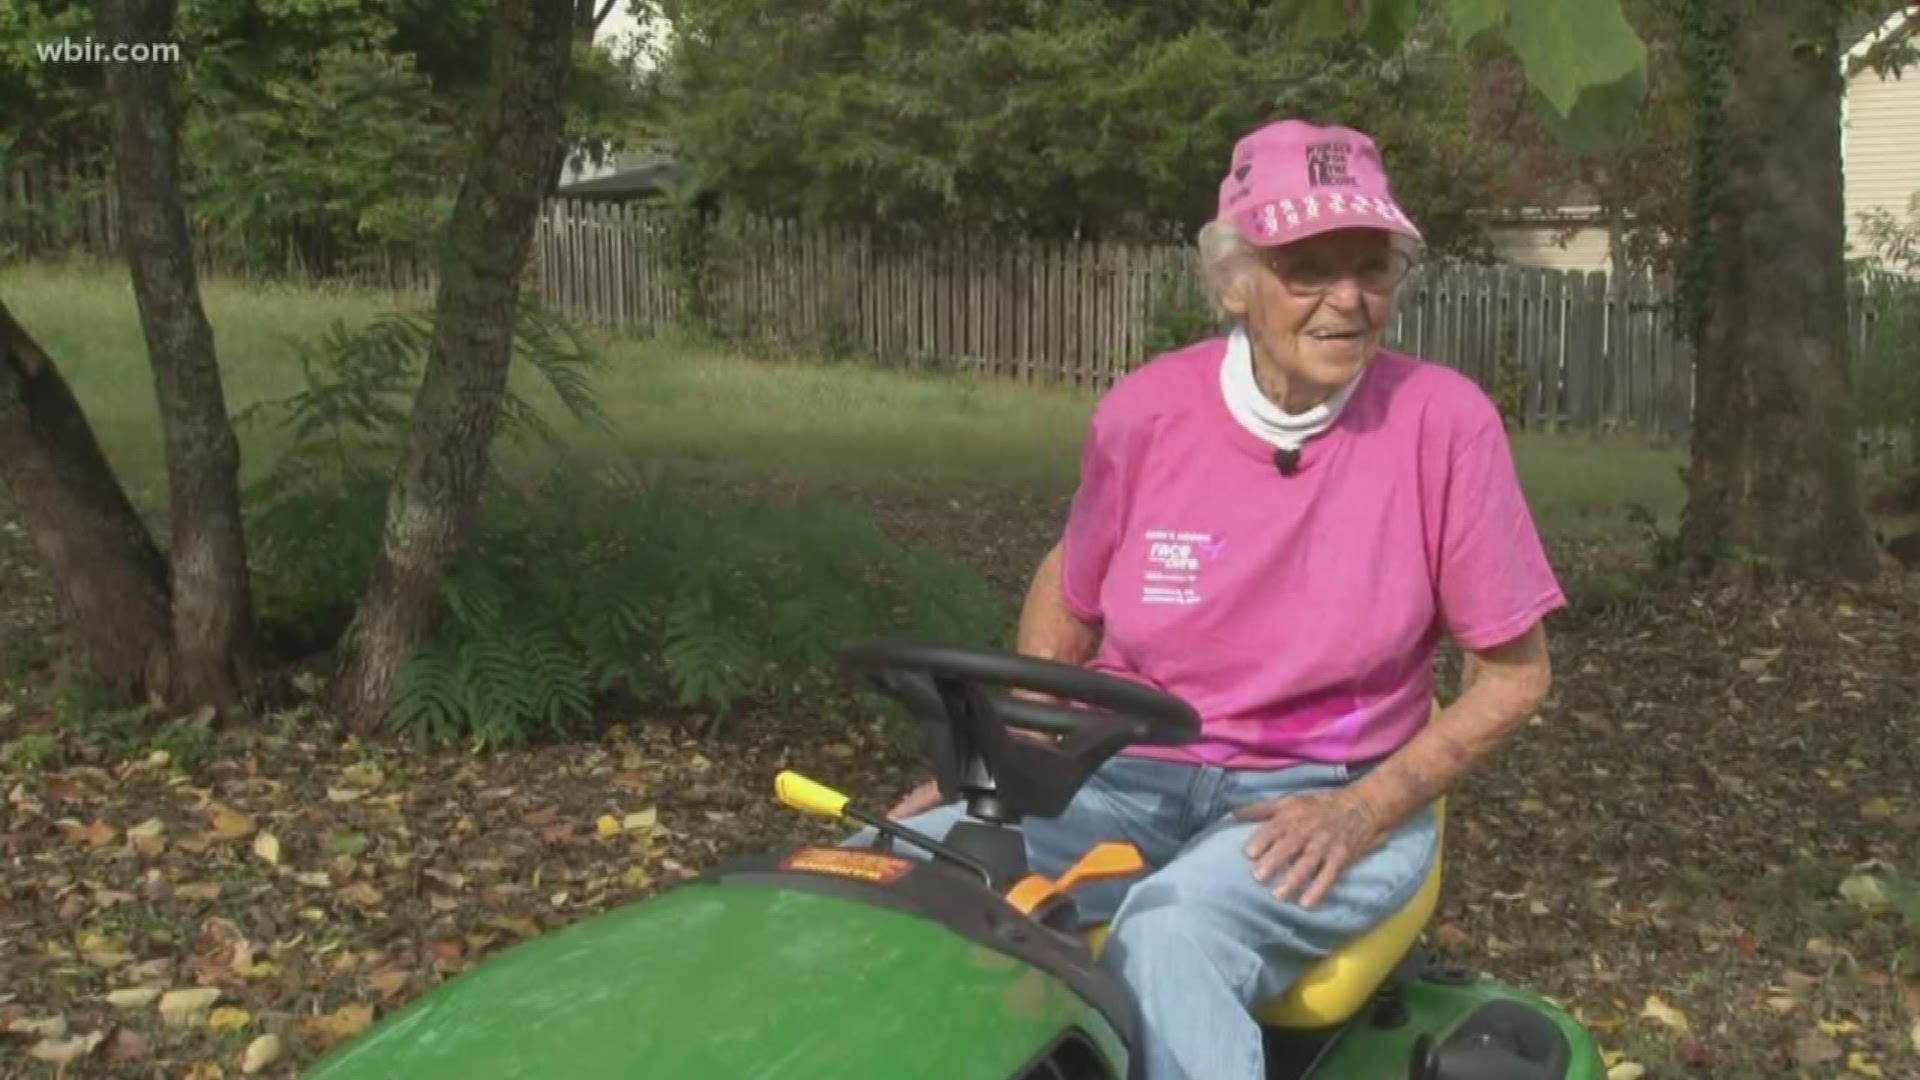 Ruth Claiborne is a familiar face for anyone who's attended Knoxville's Komen Race for the Cure.